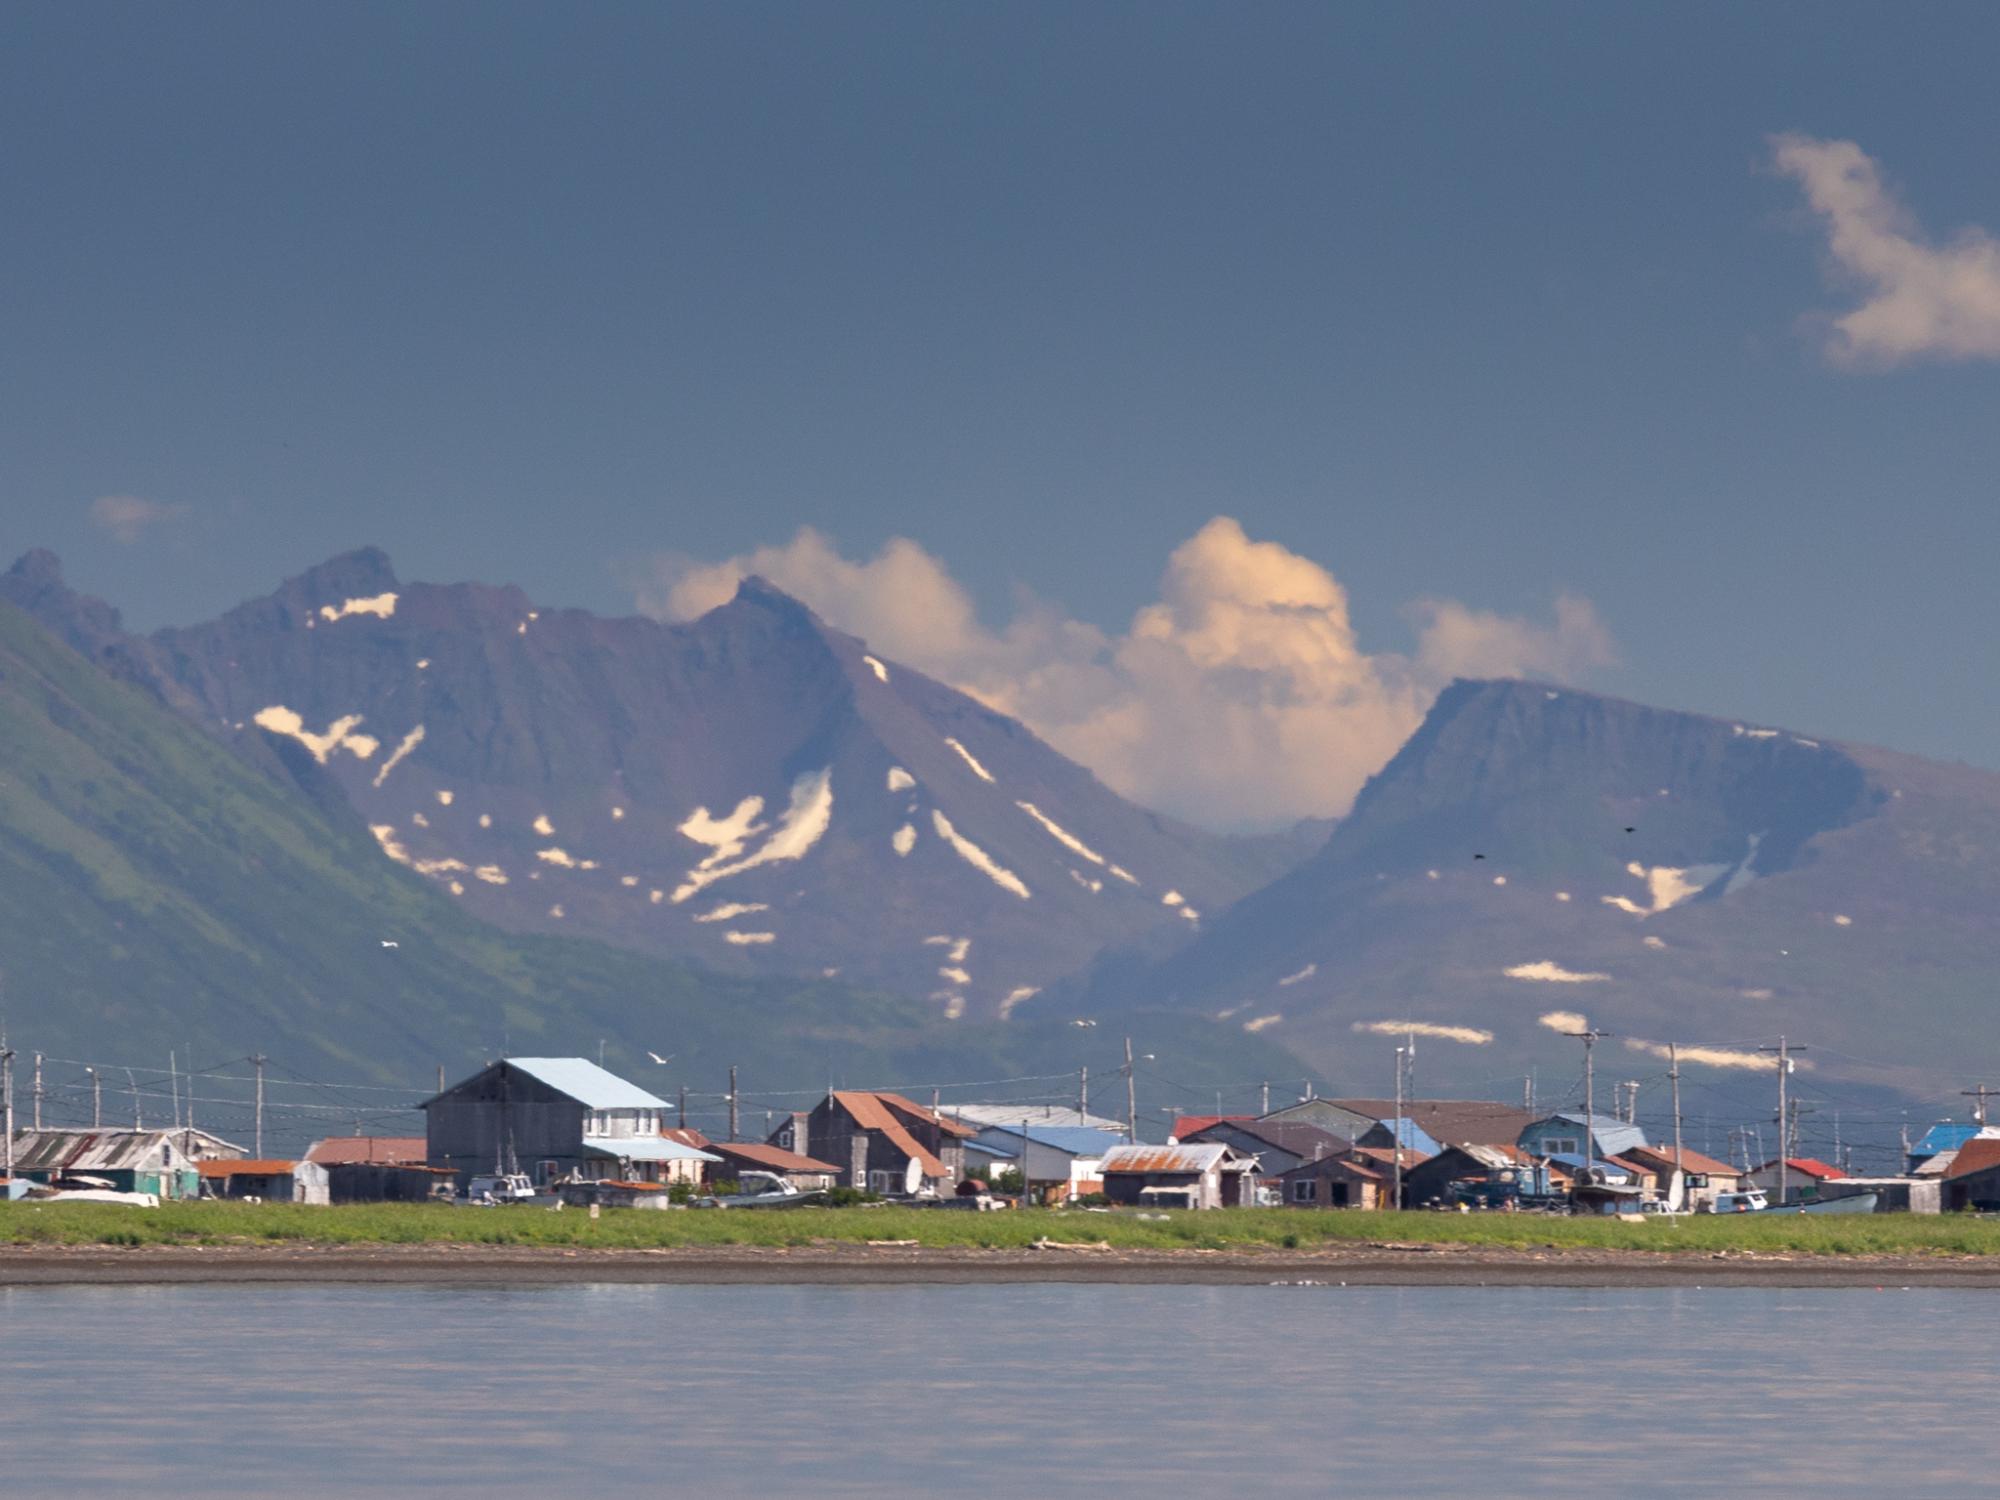 The village of Togiak as seen from the boat returning from Round Island, Alaska. Located on the shore of Bristol Bay, this community of roughly 800 people&mdash;primarily Yup&rsquo;ik&mdash;is a gateway to the Walrus Islands State Game Sanctuary.